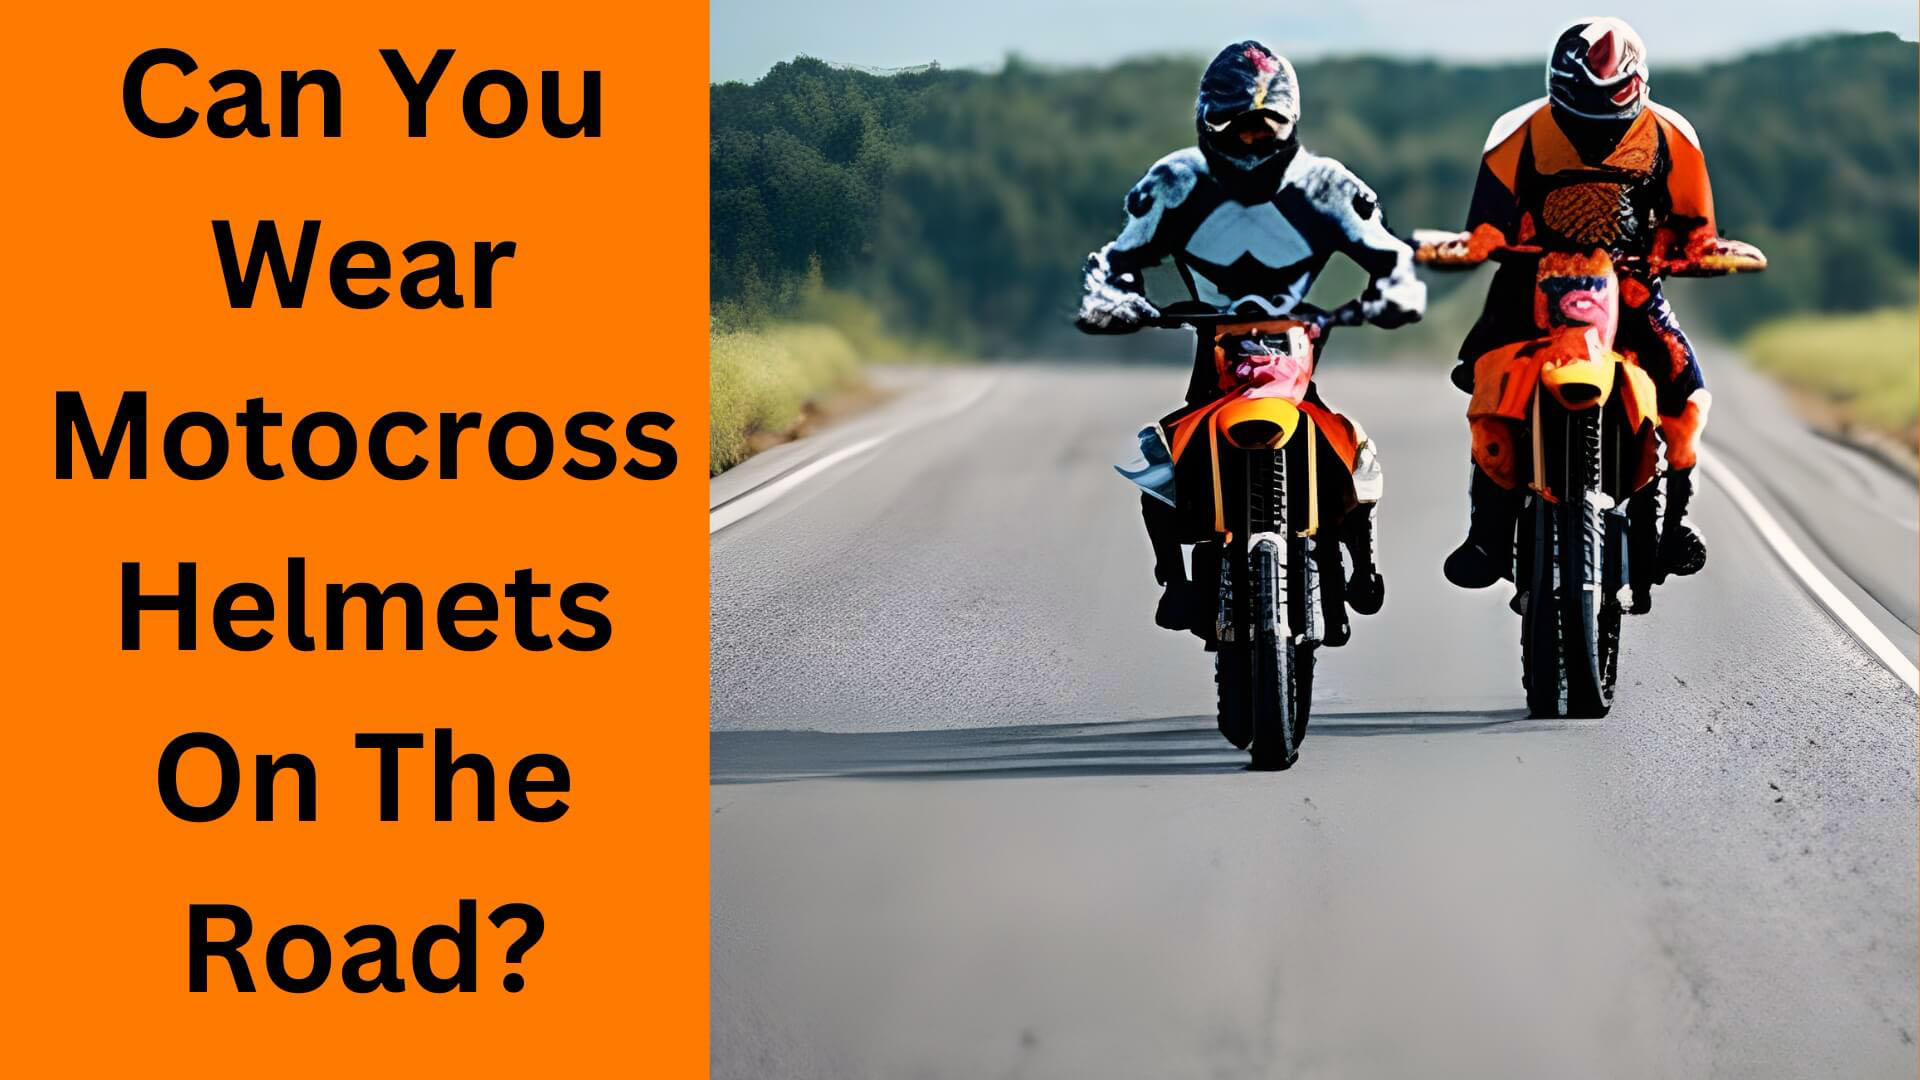 Can You Wear Motocross Helmets On The Road?